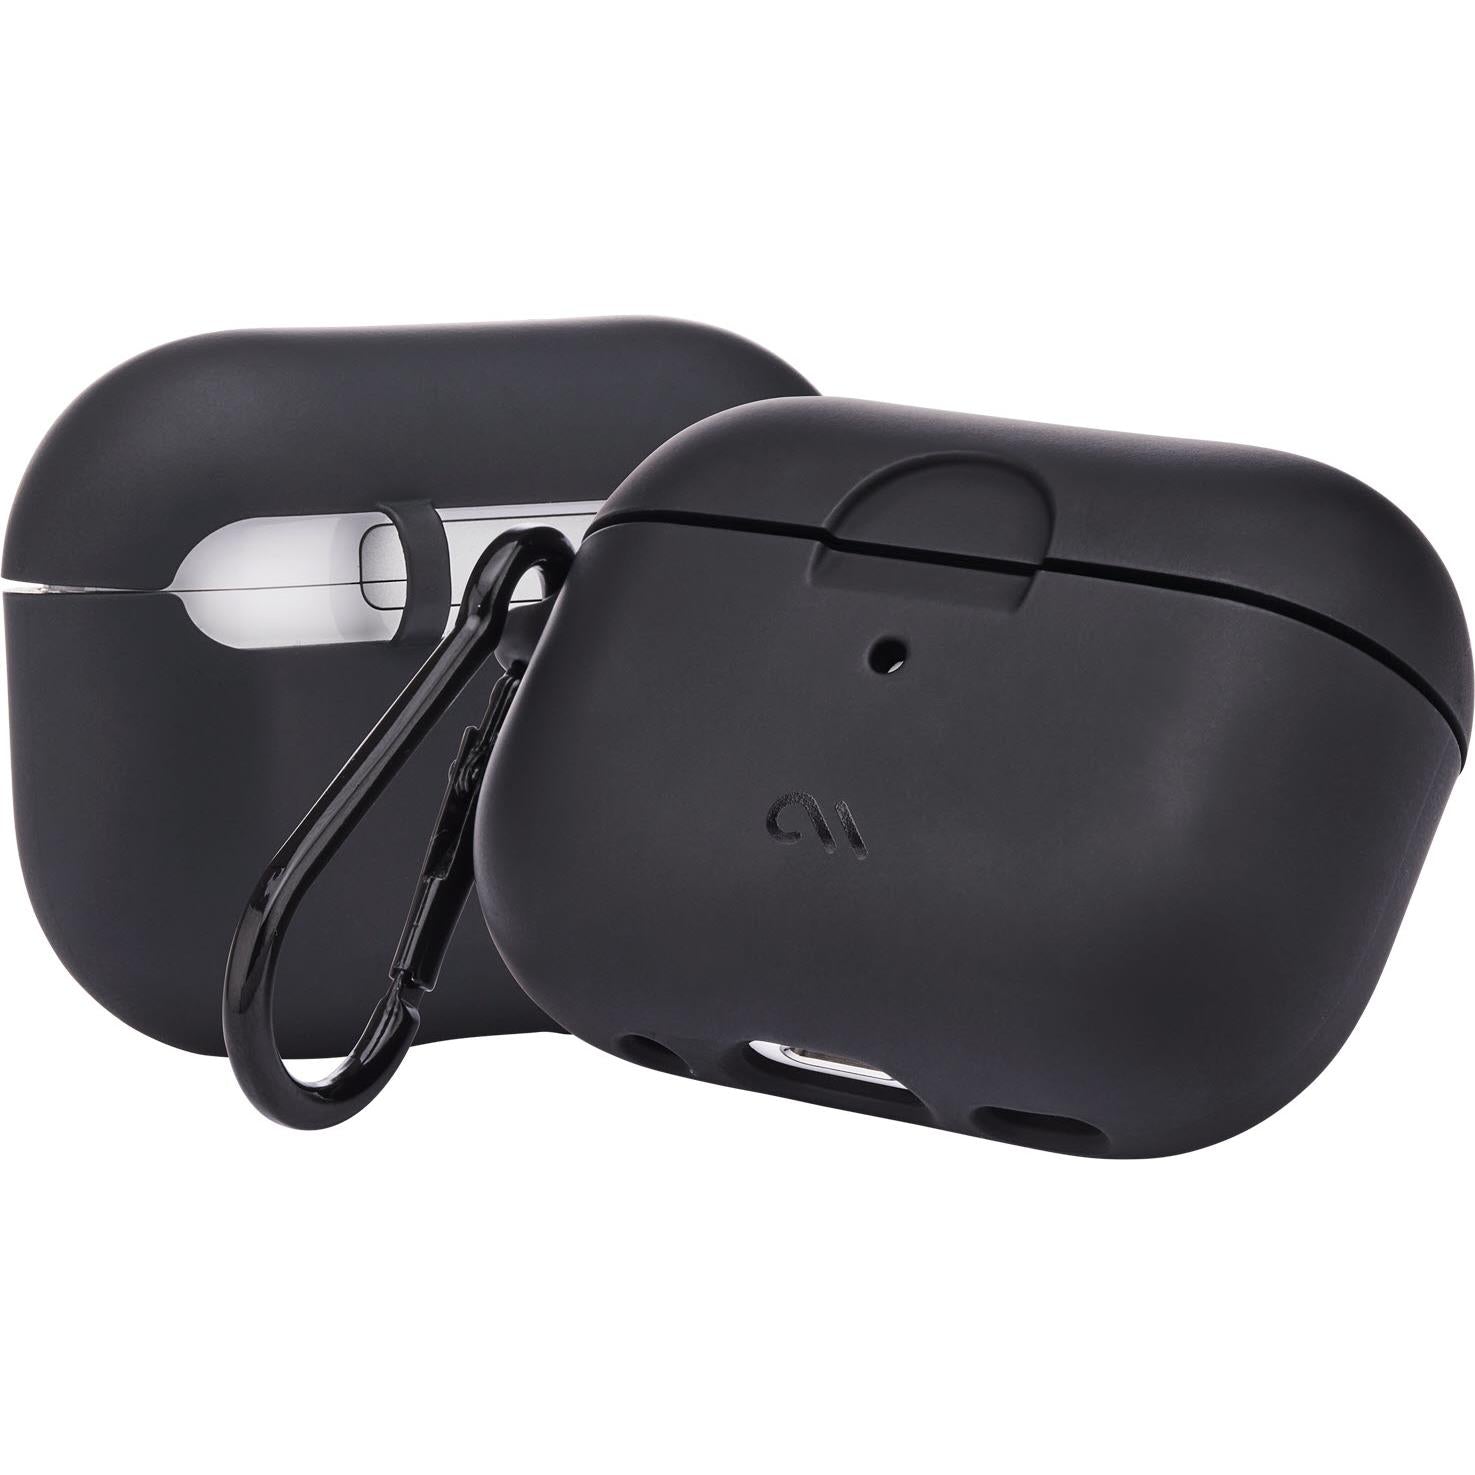 case-mate tough case with carabiner clip for airpods pro 1st/2nd gen (black)